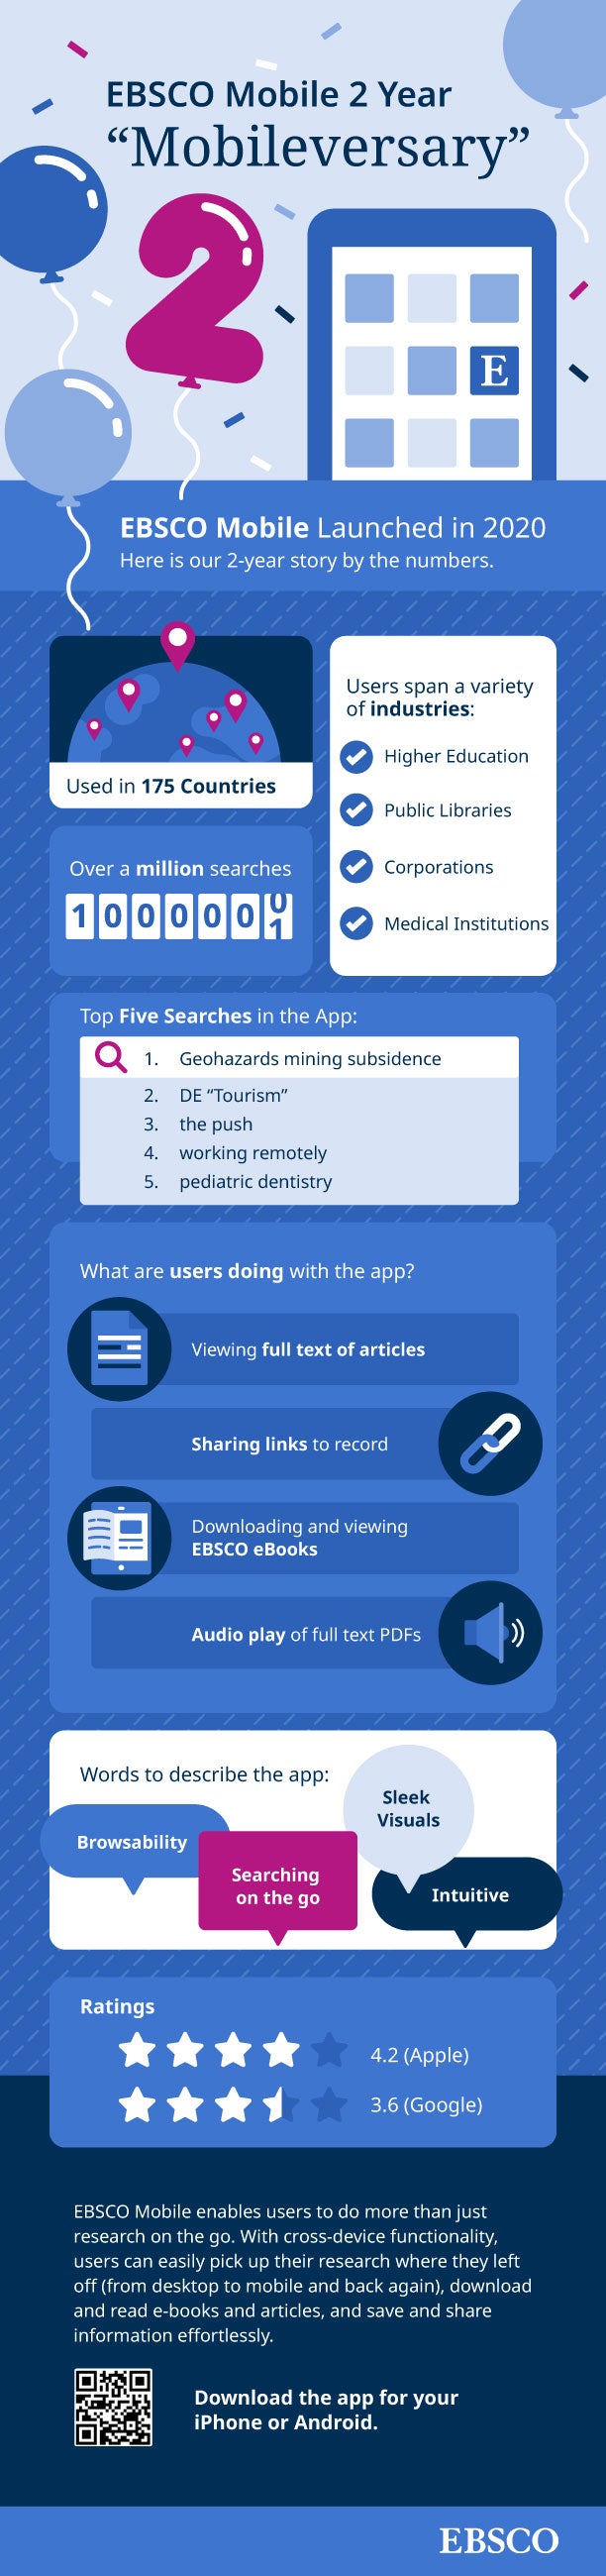 EBSCO Mobile App Two Year Anniversary Infographic   